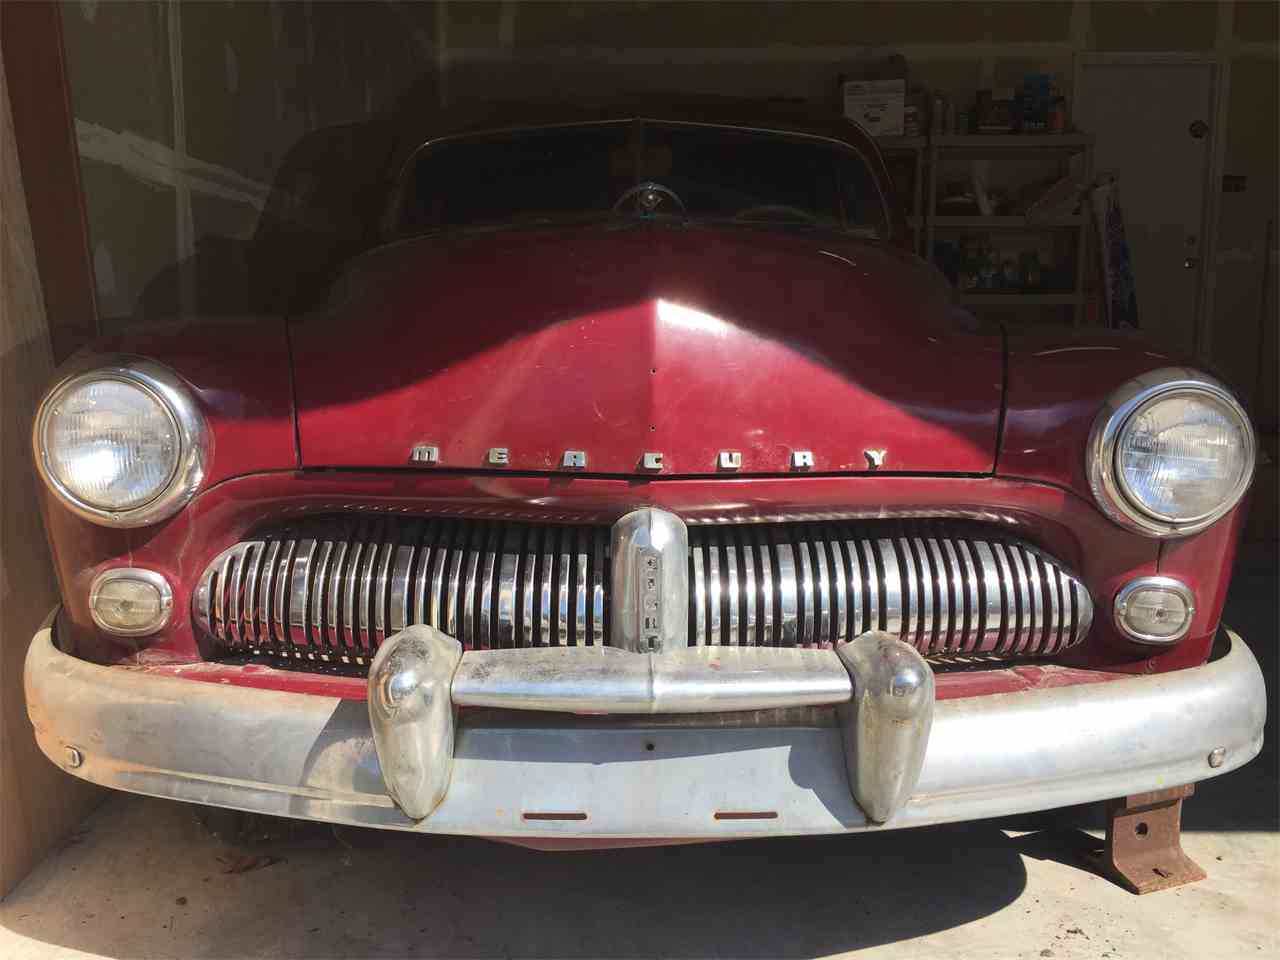 At publication, this project Mercury was still available for $6,000. | ClassicCars.com photo